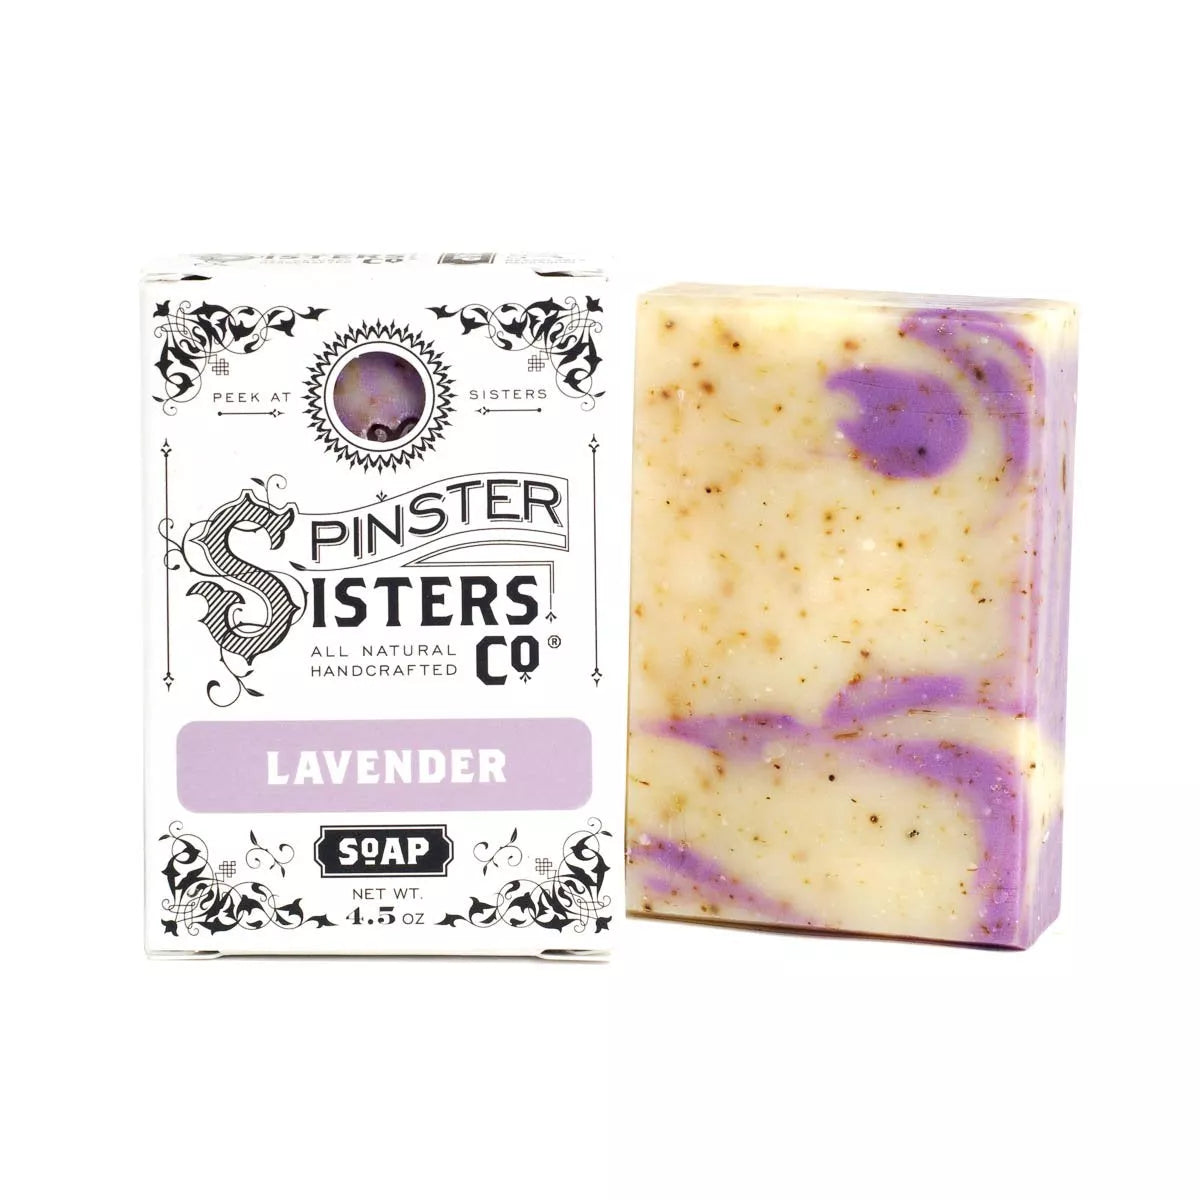 Box that reads Lavender next to a soap bar with purple swirls and speckled with lavender